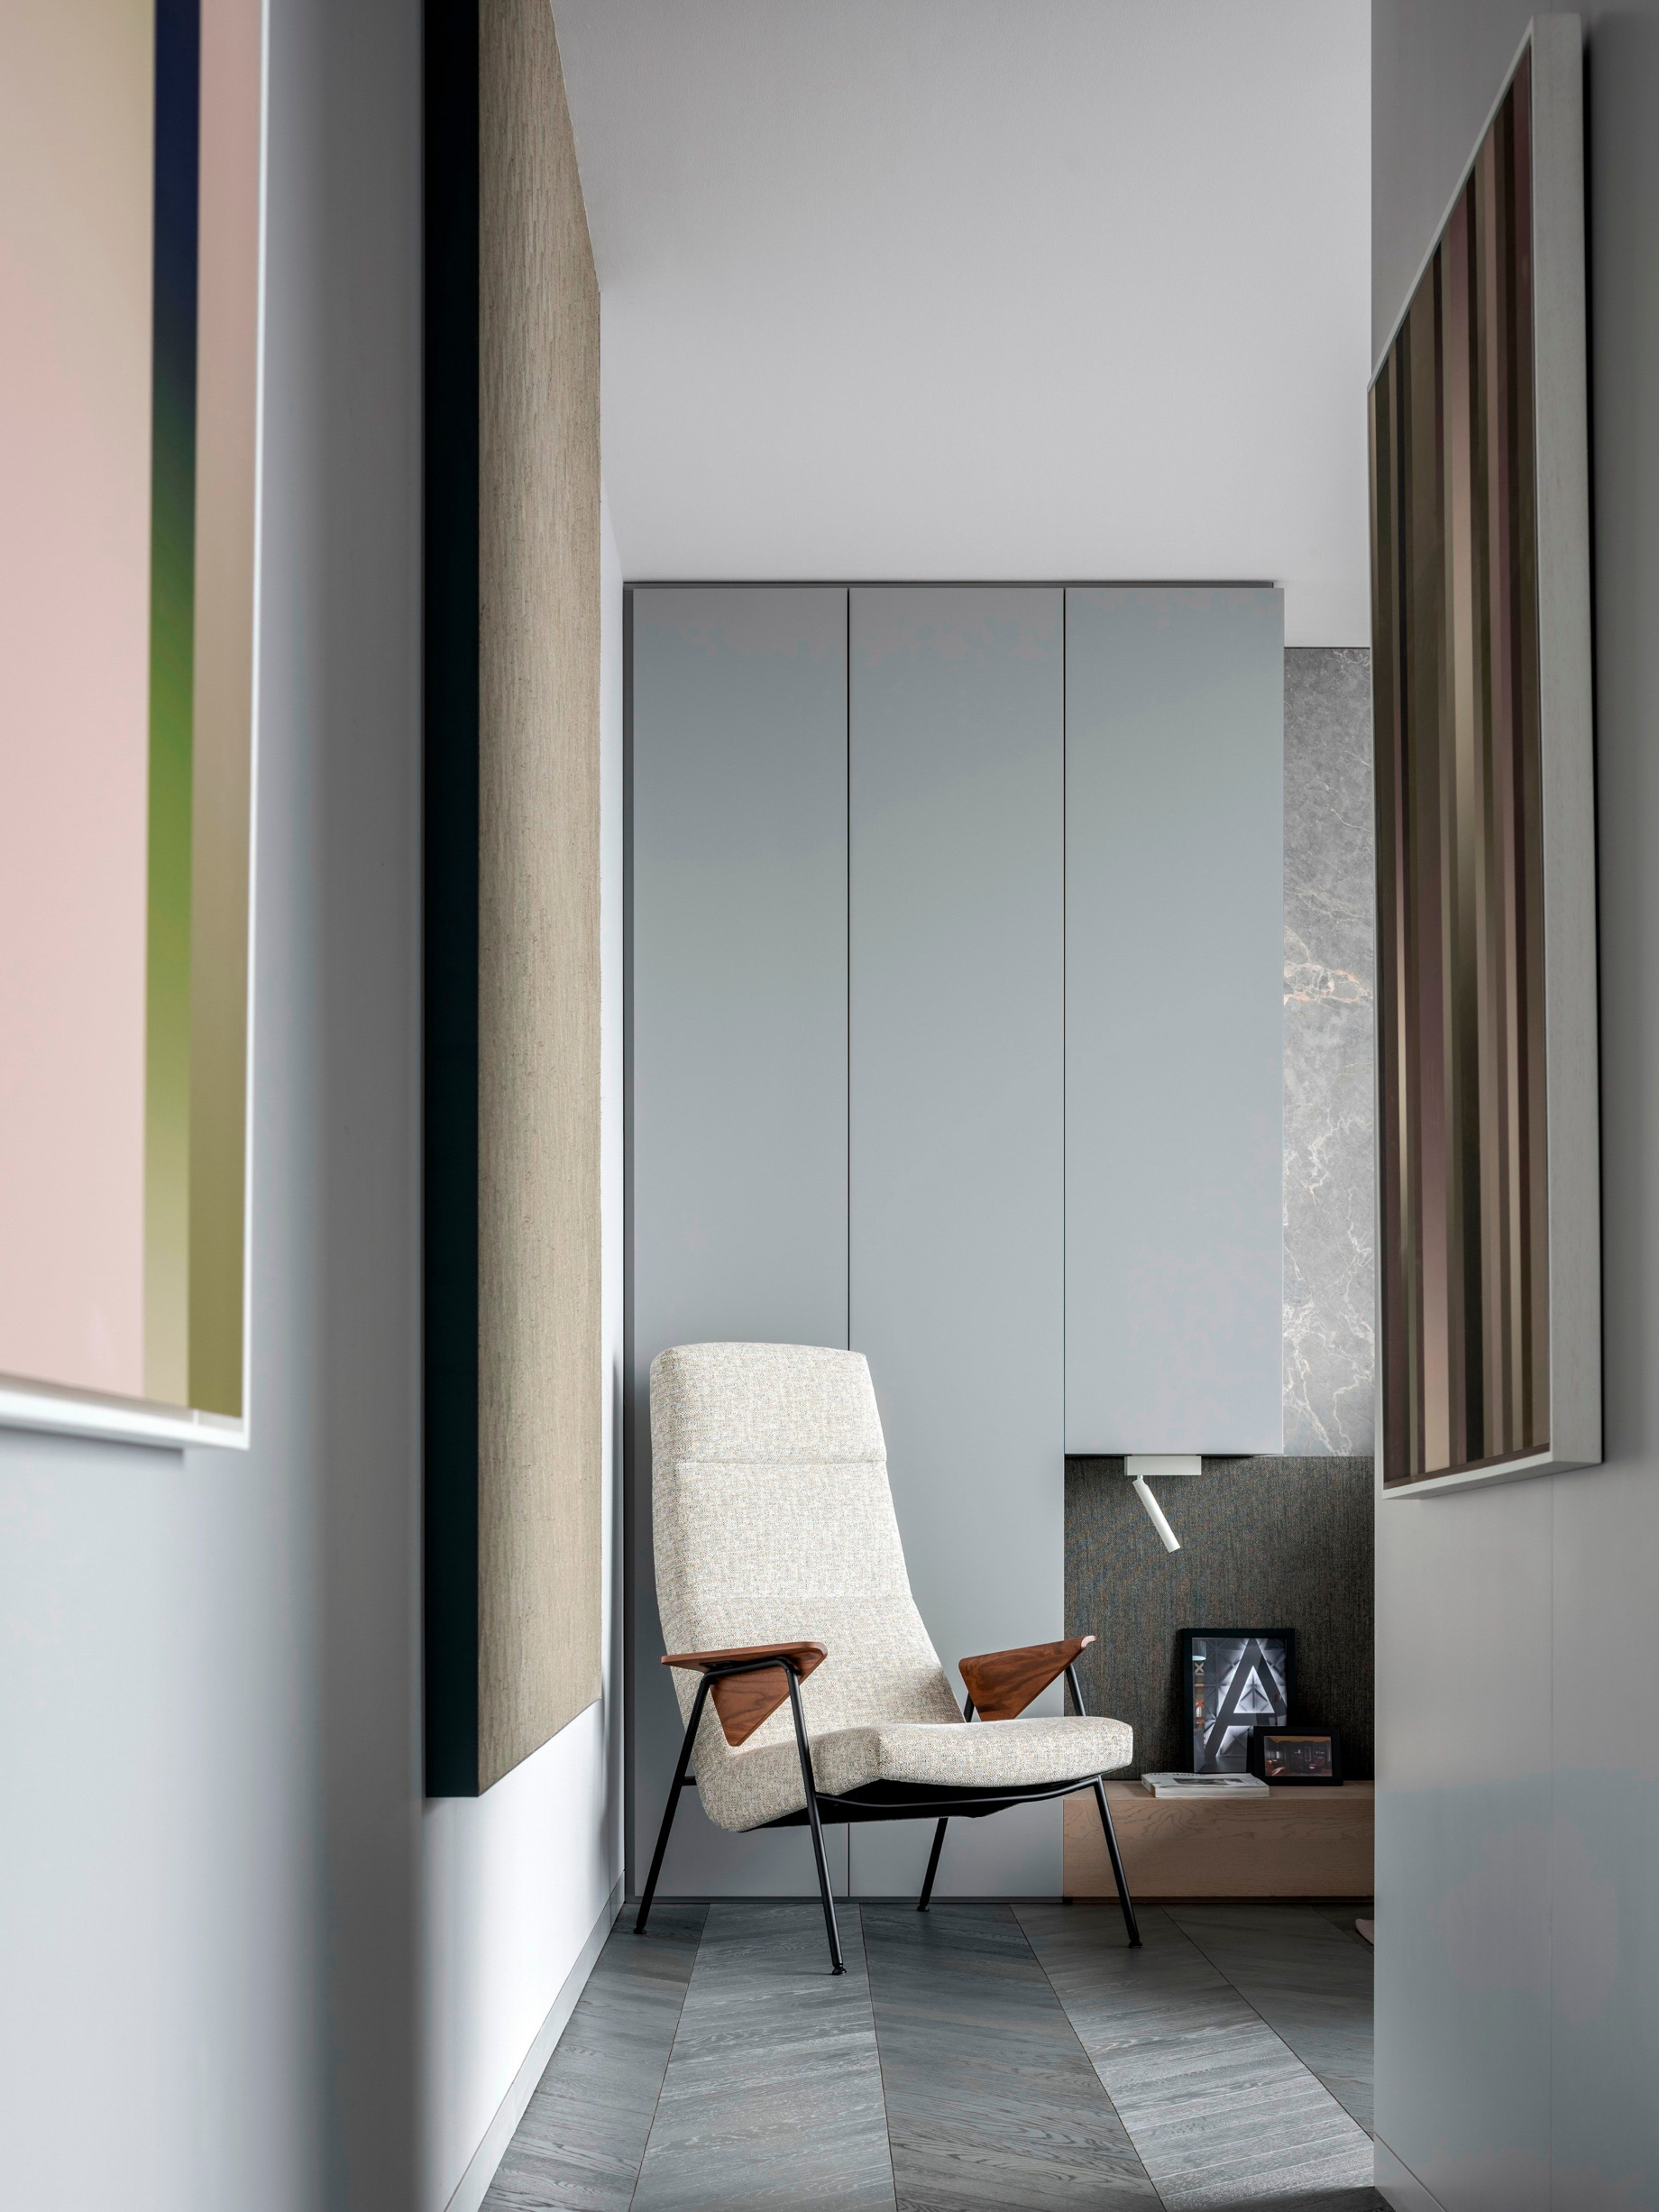 Shades of Grey Apartment Interior Design Shanghai, China – Ippolito Fleitz Group – Bedroom Lounge Chair